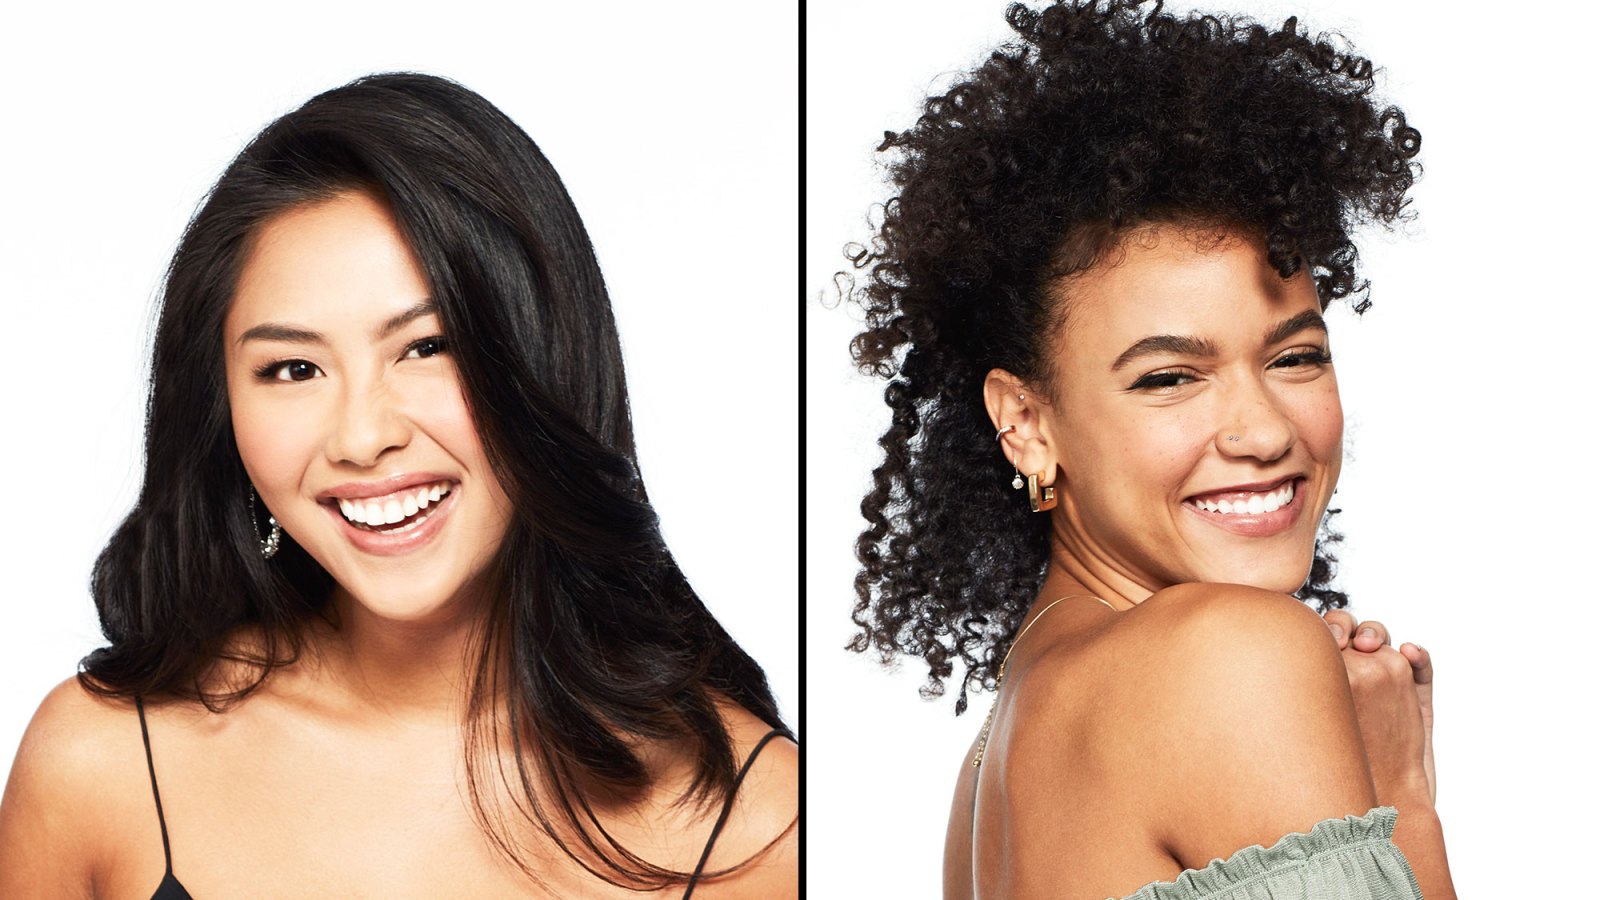 Bachelor Season 24 Contestants Jasmine Nguyen and Alexa Caves Arent Dating After Sparking Speculation